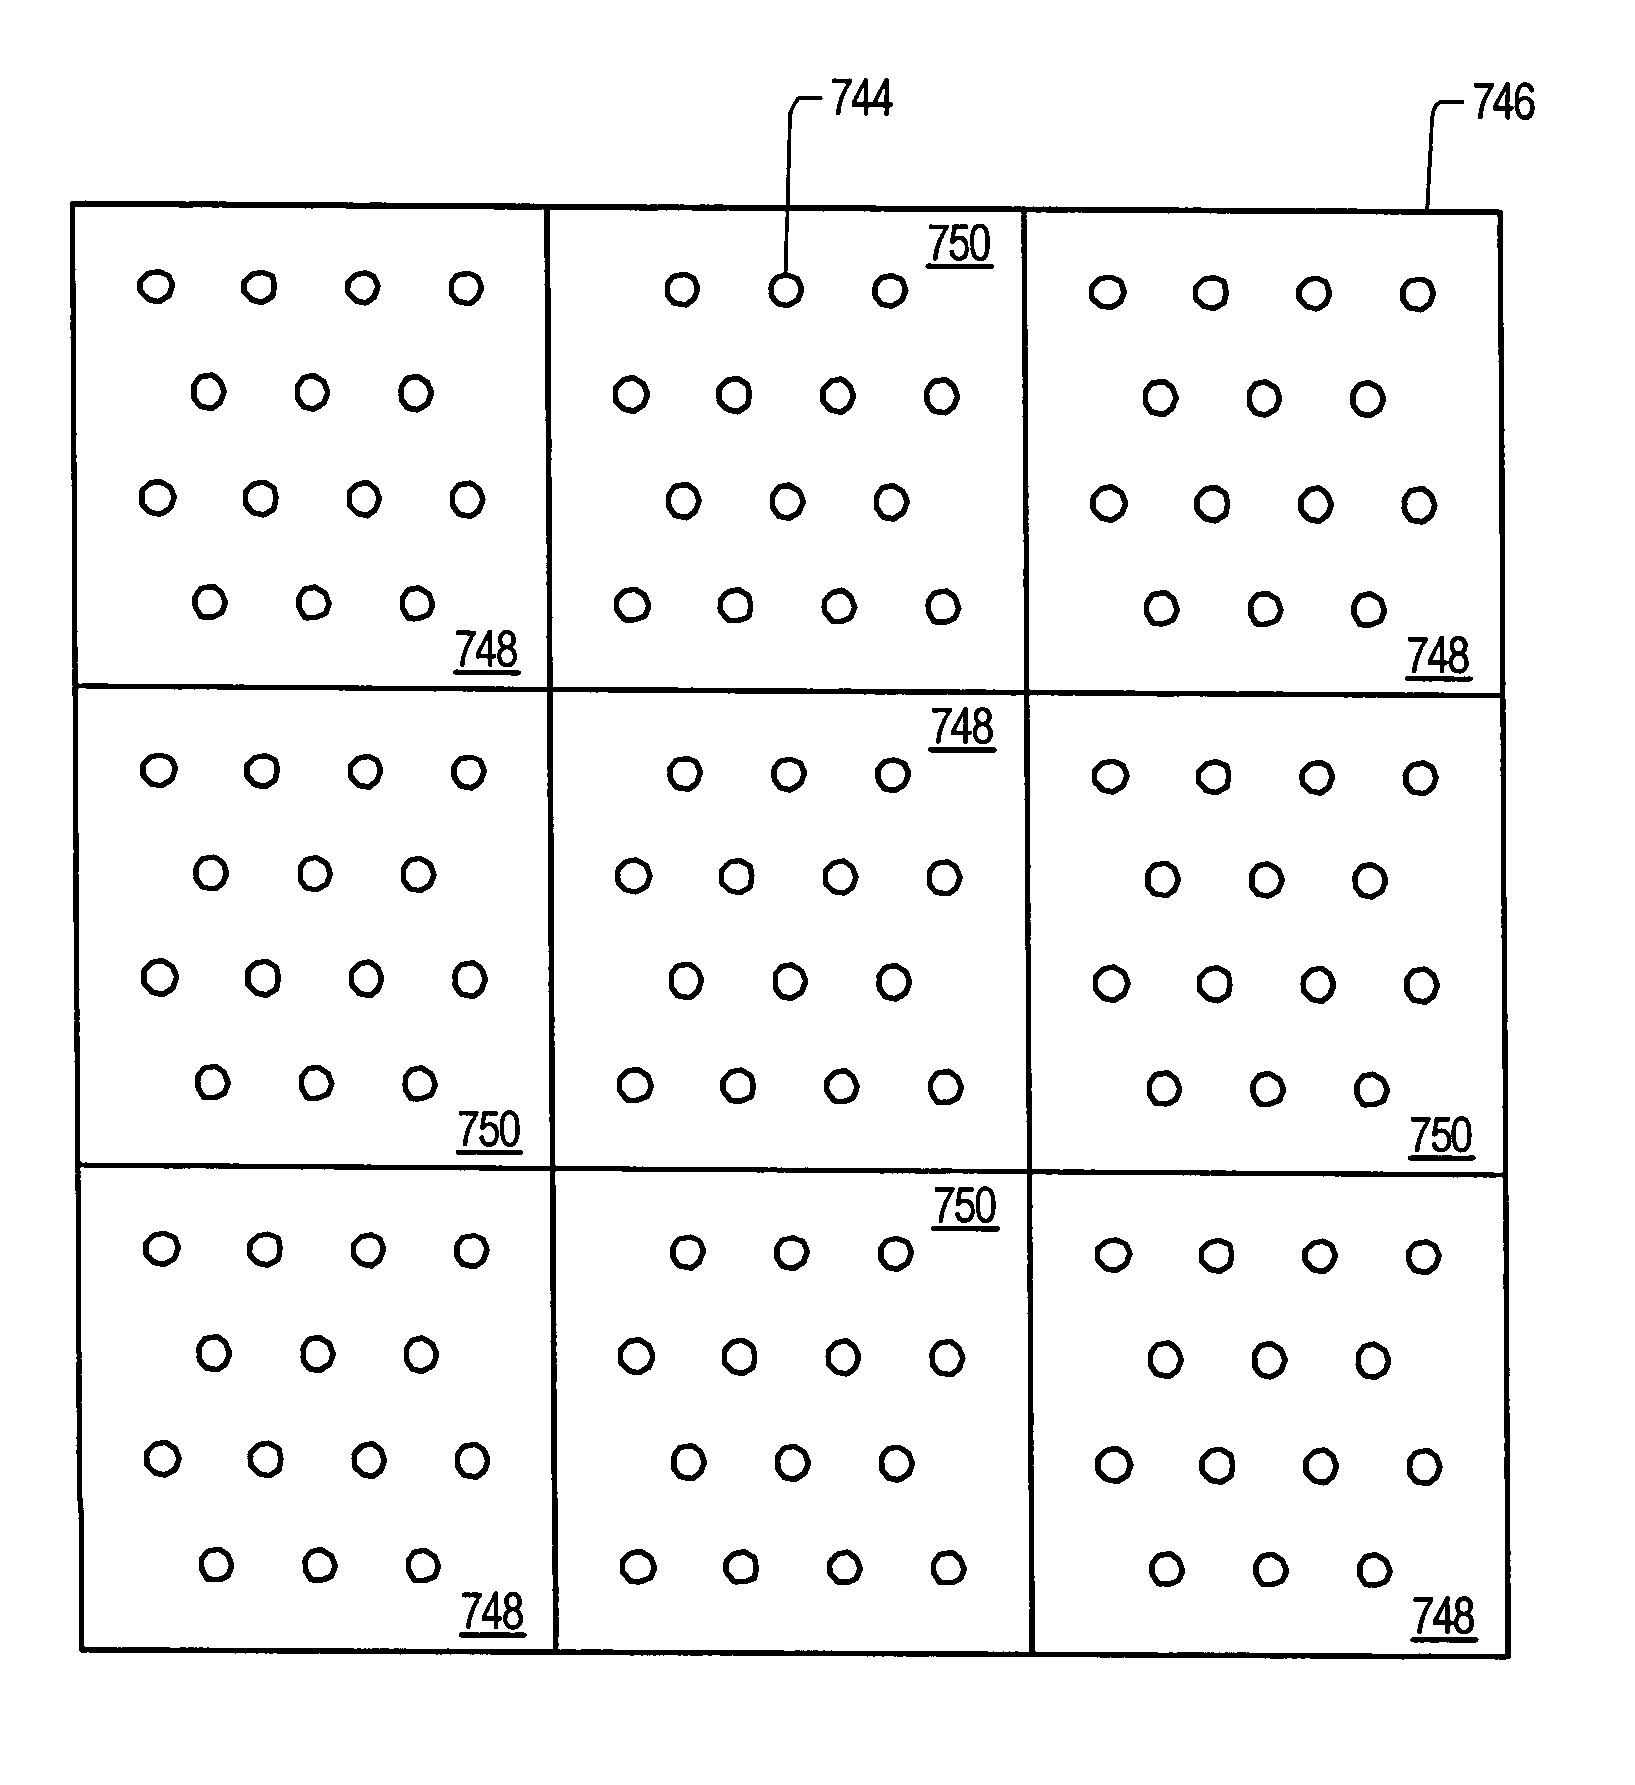 Staged and/or patterned heating during in situ thermal processing of a hydrocarbon containing formation